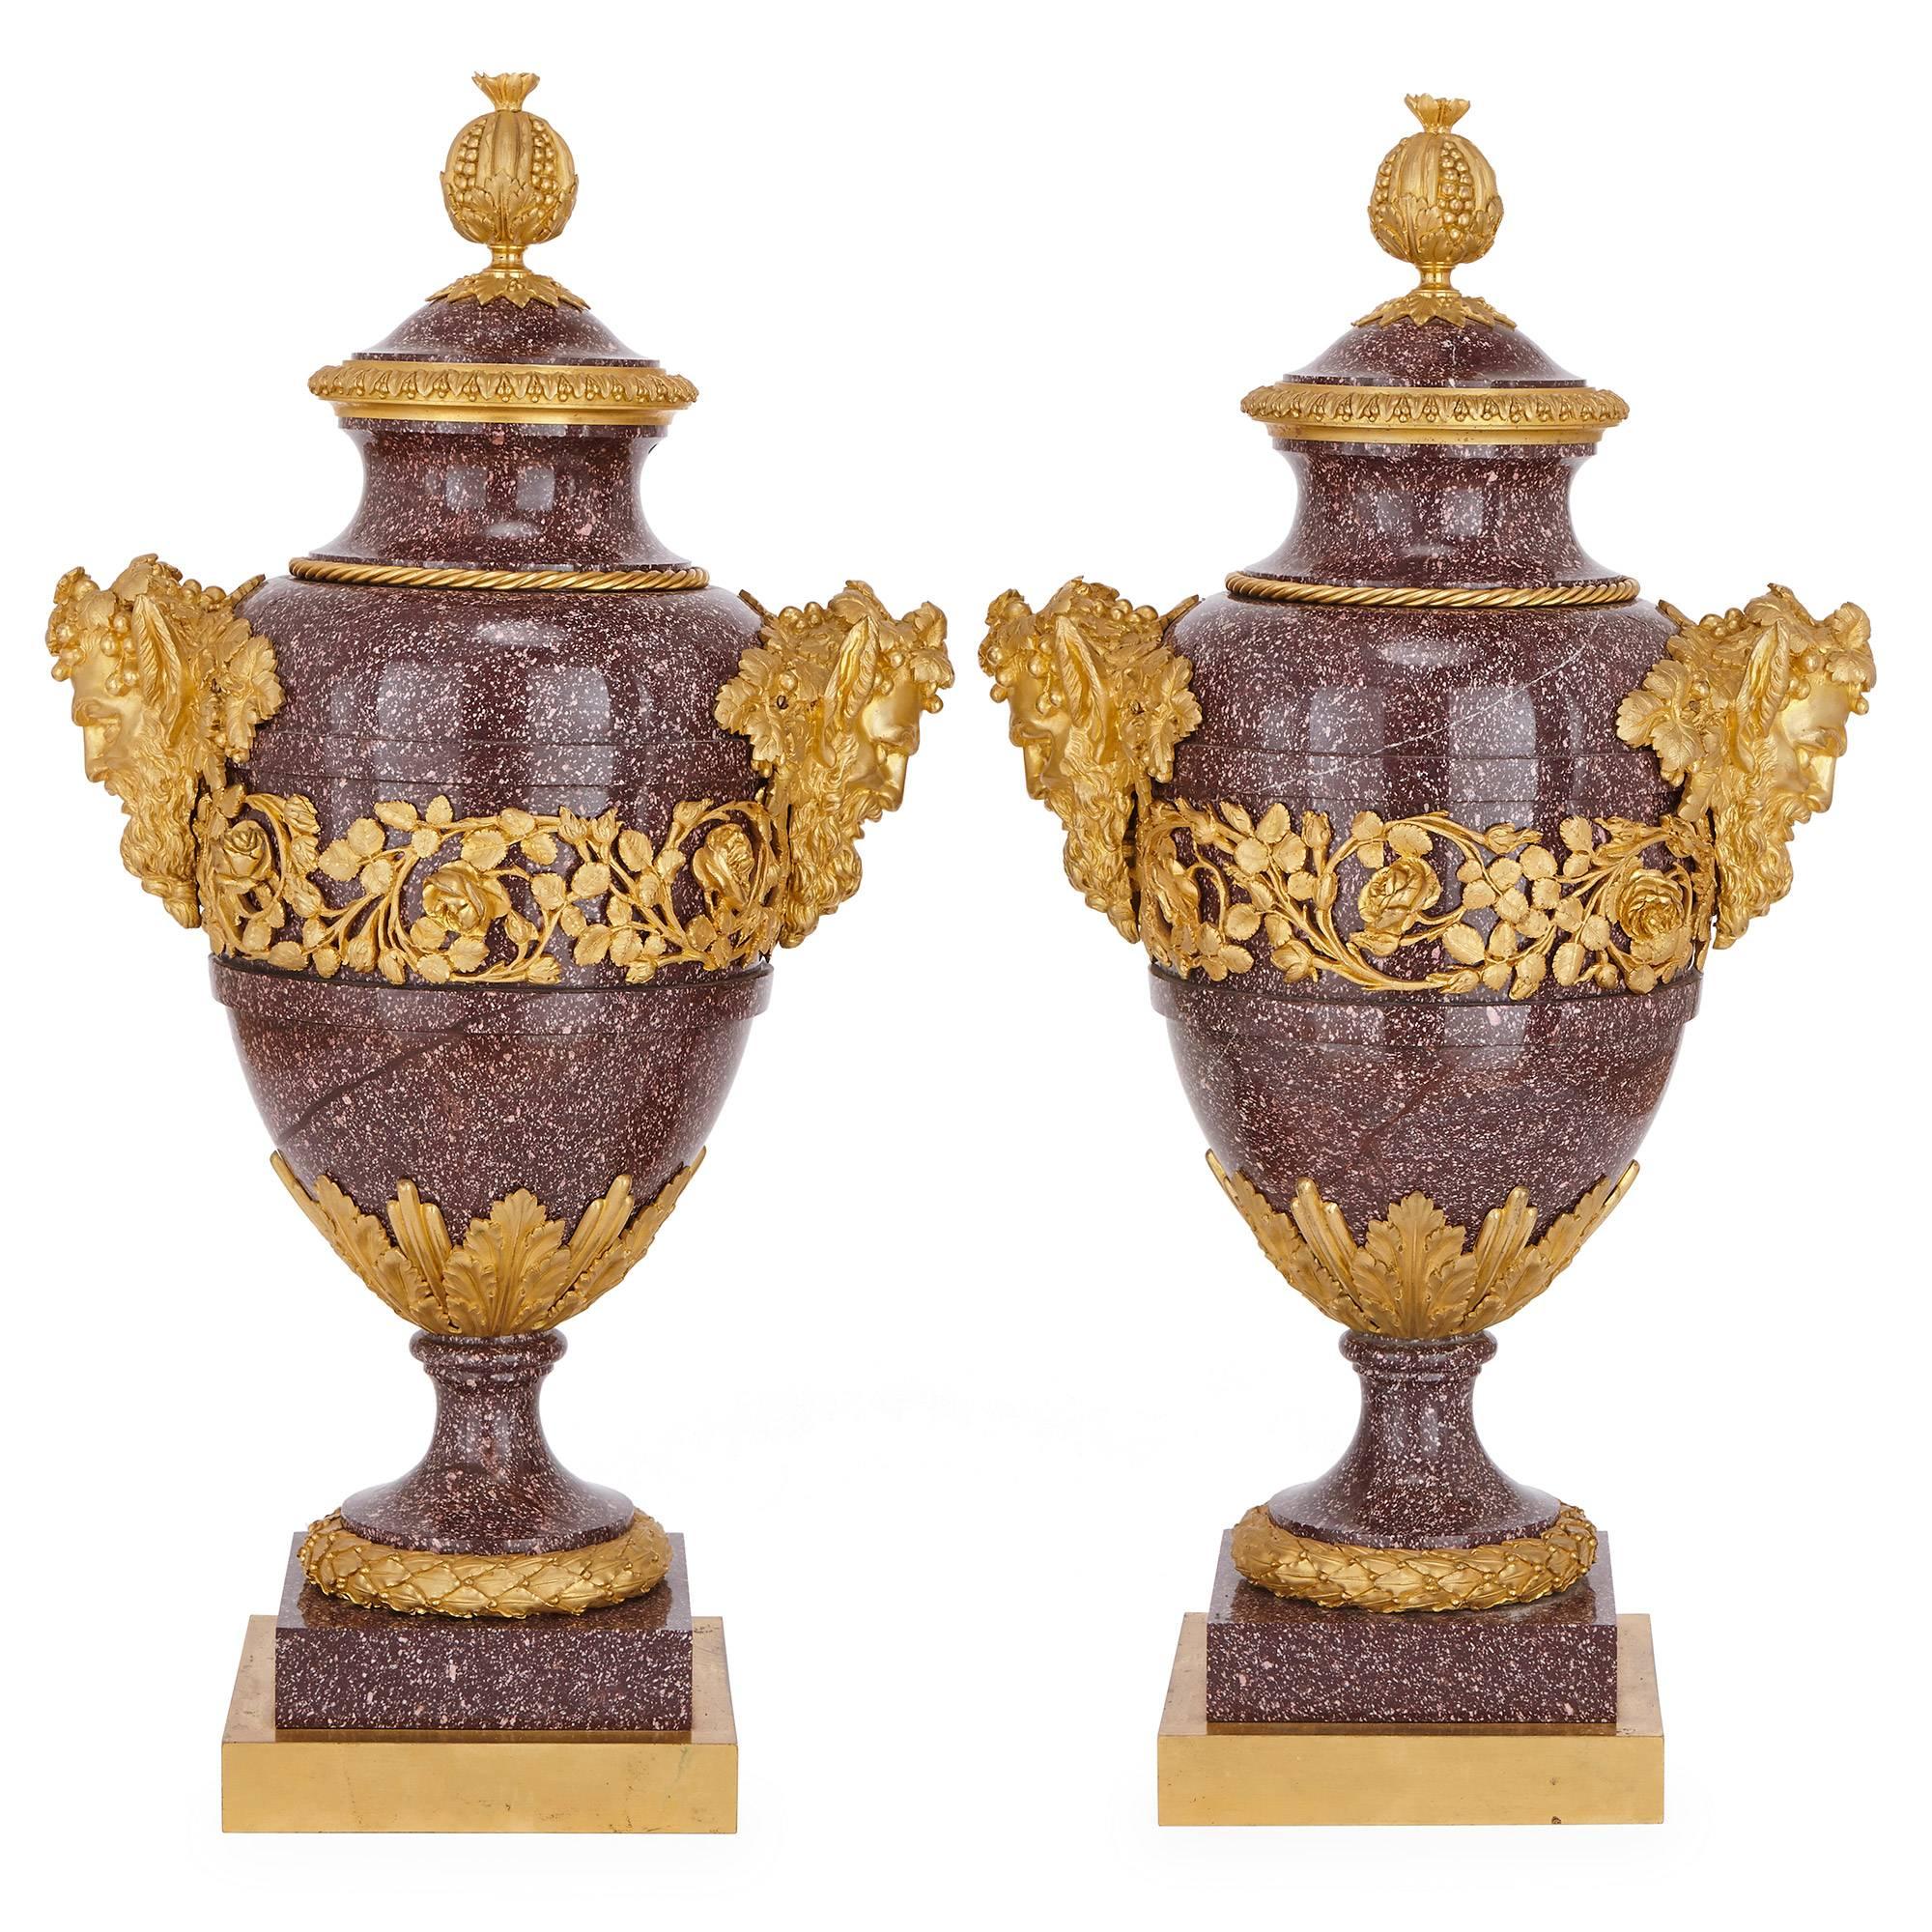 This fine pair of neoclassical style vases are by Maison Millet, the renowned 19th century Paris-based firm, which was established in 1853.
The vases are crafted in a vibrantly coloured porphyry and take an ovoid form. A band of finely cast gilt